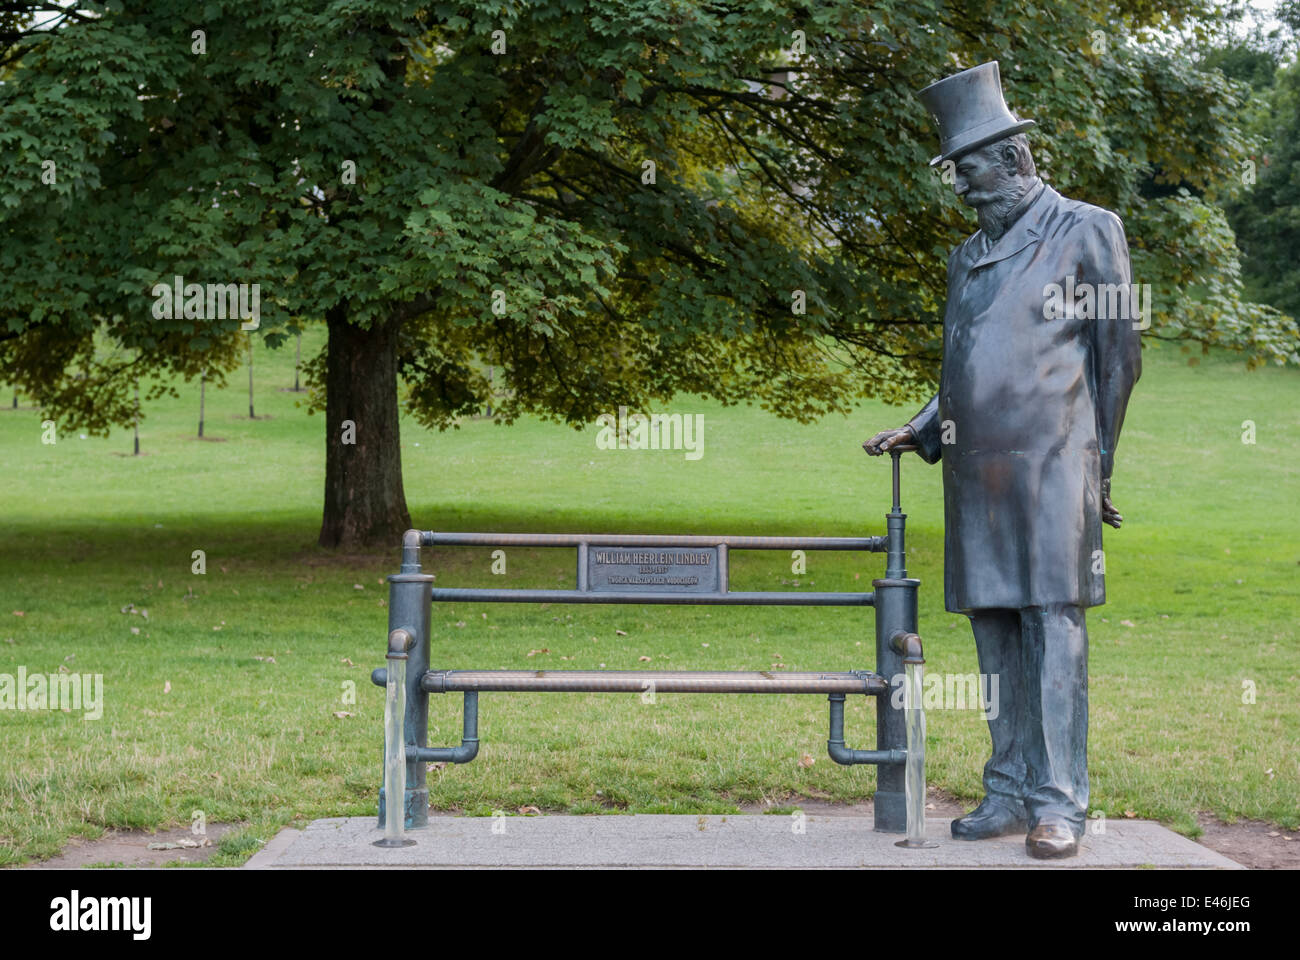 William Heerlein Lindley statue and bench, Warsaw, Poland Stock Photo